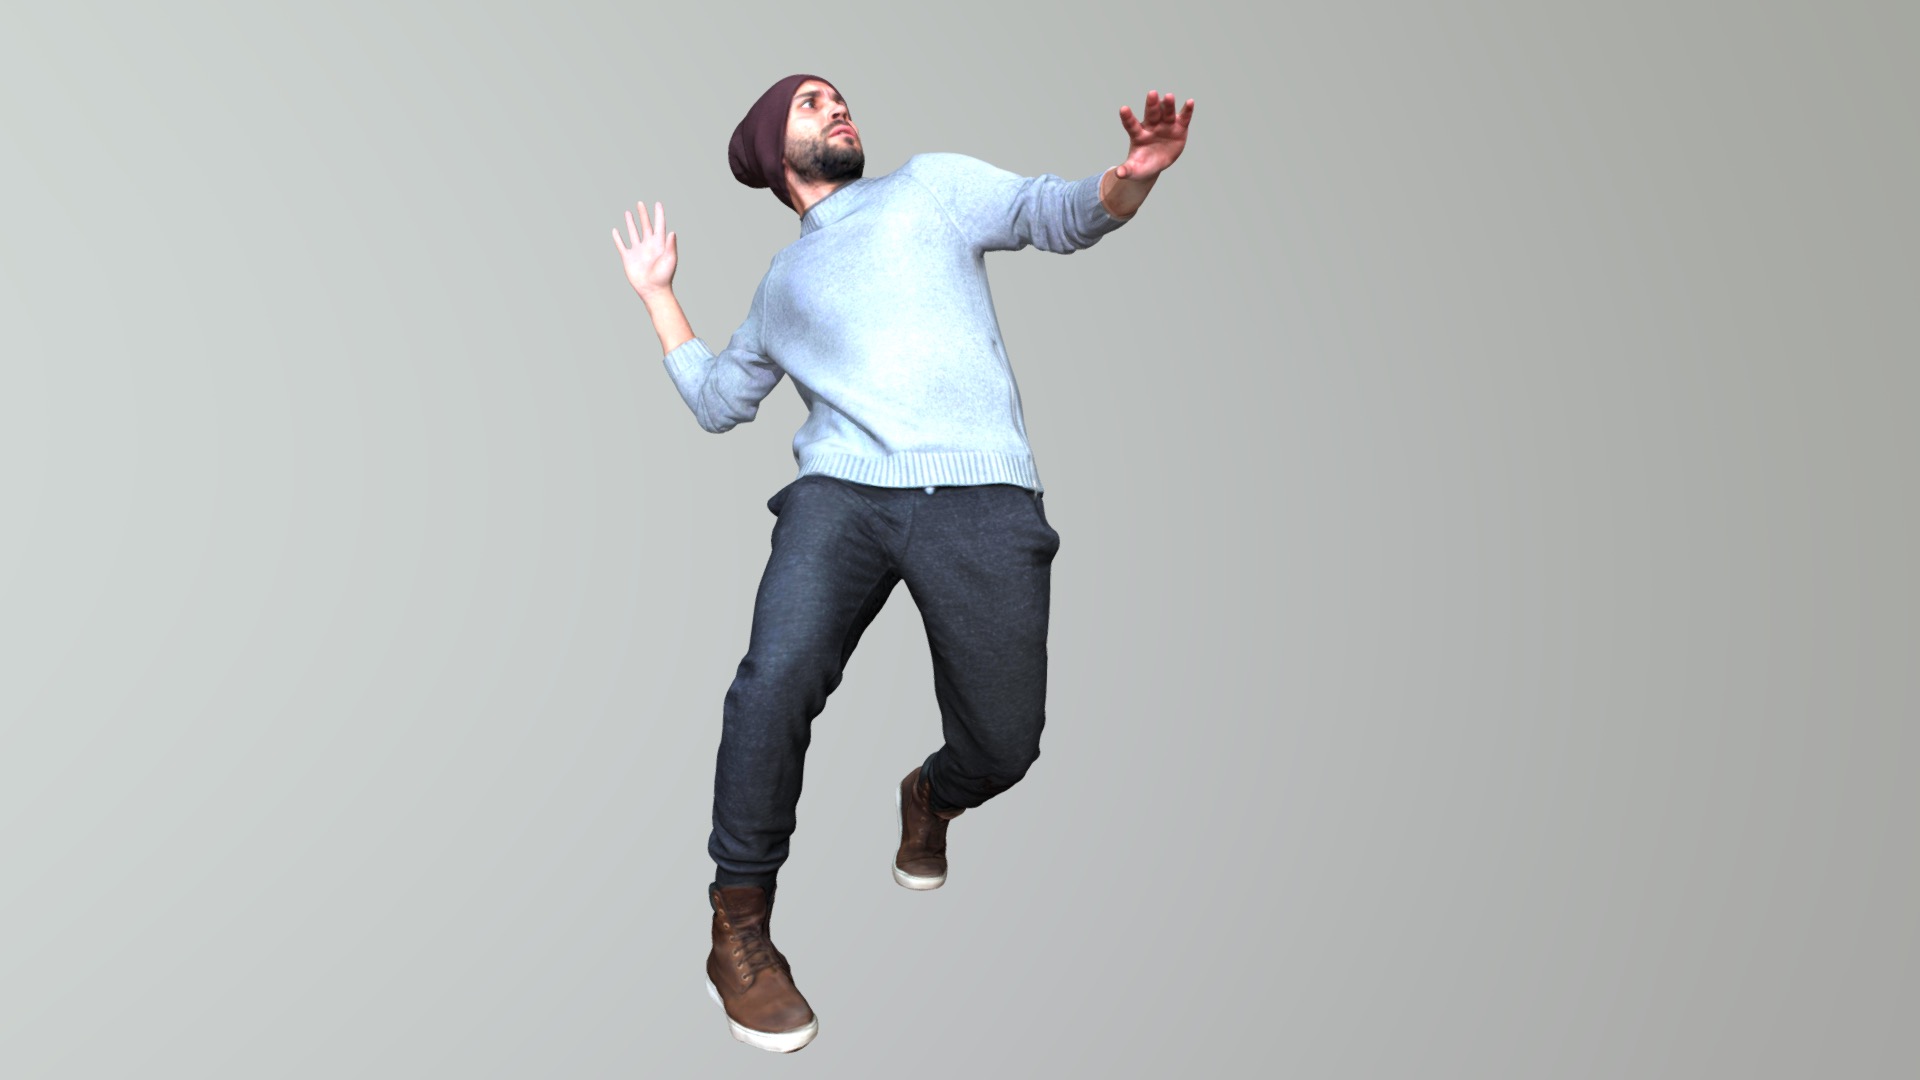 3D model No2 – Matrix Guy - This is a 3D model of the No2 - Matrix Guy. The 3D model is about a man jumping in the air.